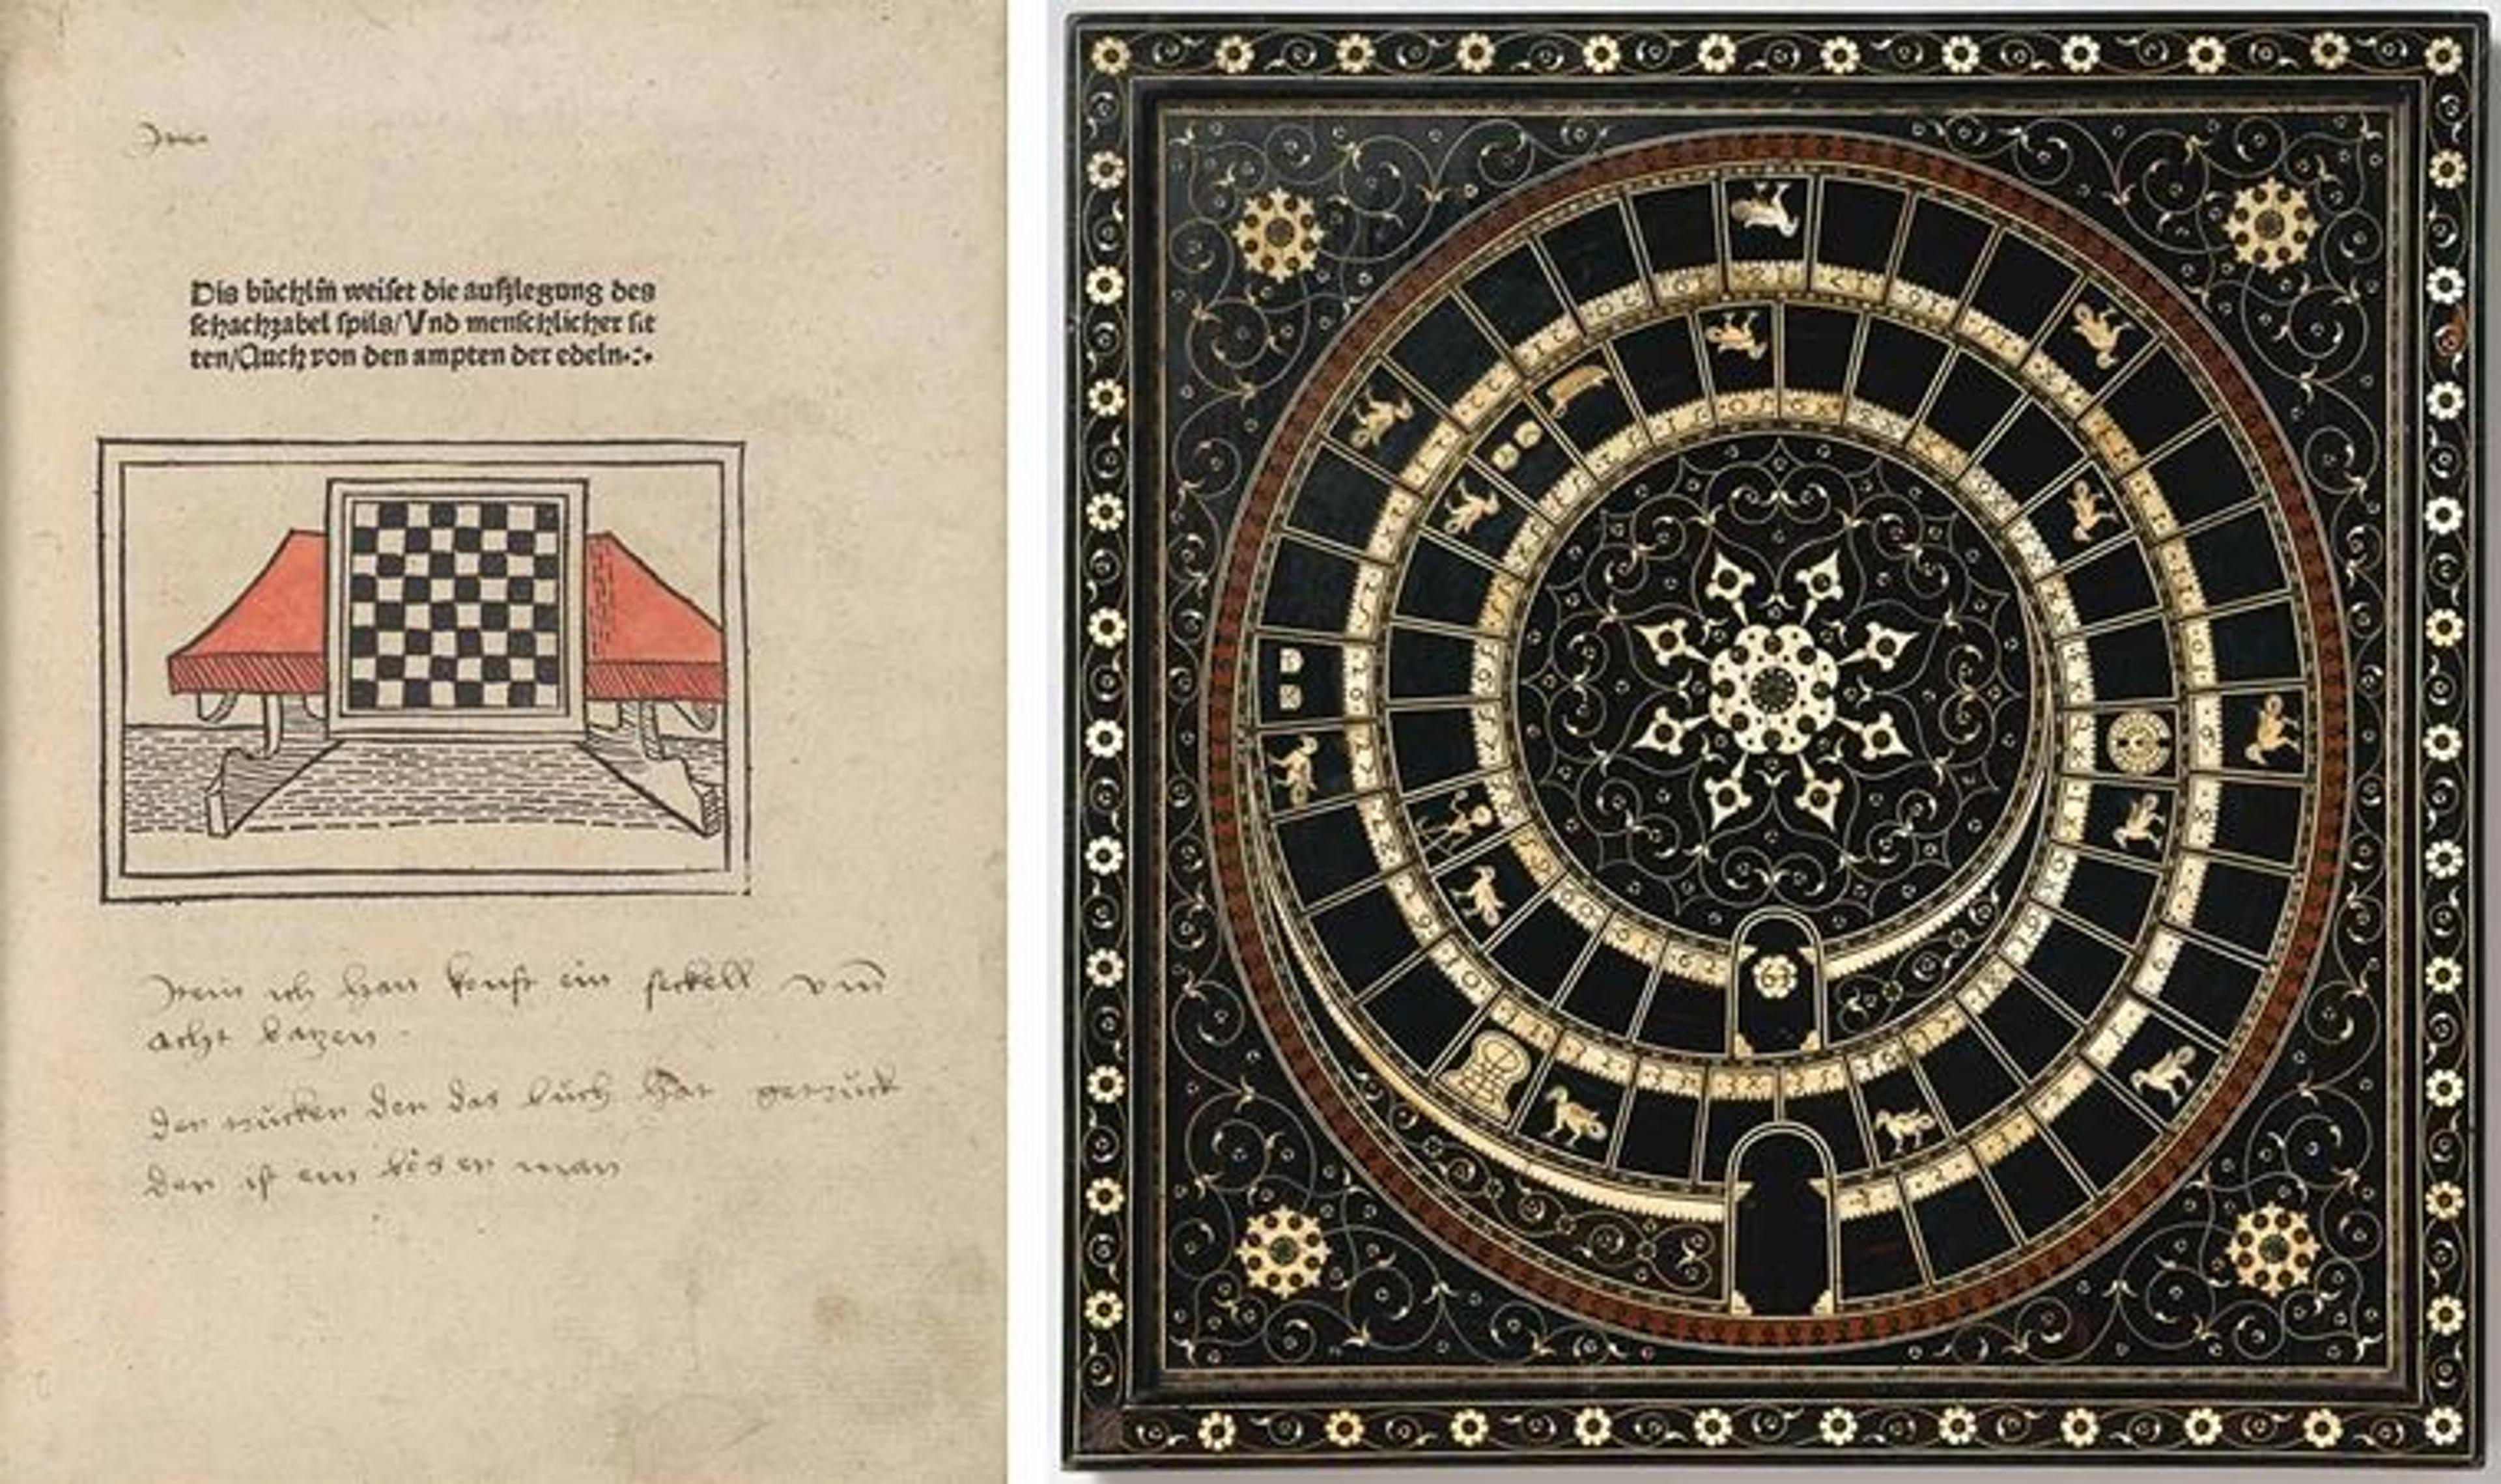 Left: a printed page featuring german text and a drawn image of a chess set on a table. Right: an elegant chess set, carved from precious minerals and ivory.